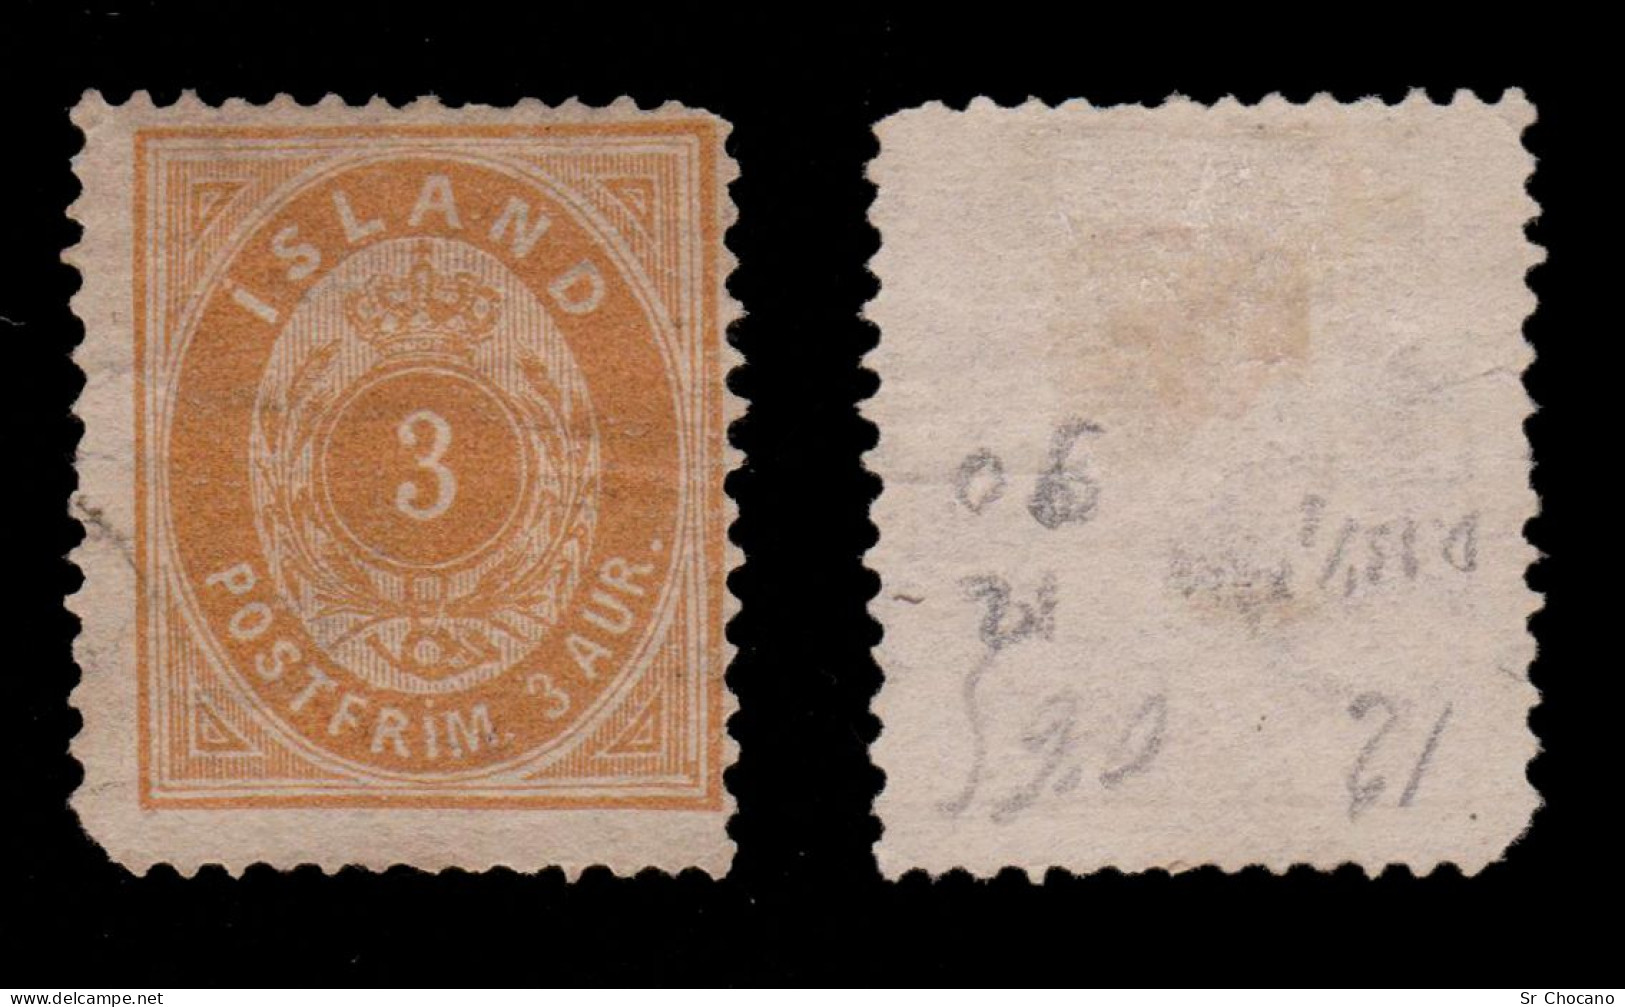 ICELAND STAMP.1882-98.3a .Scott.15.FINE USED.Perf.14x13 ½ - Usados